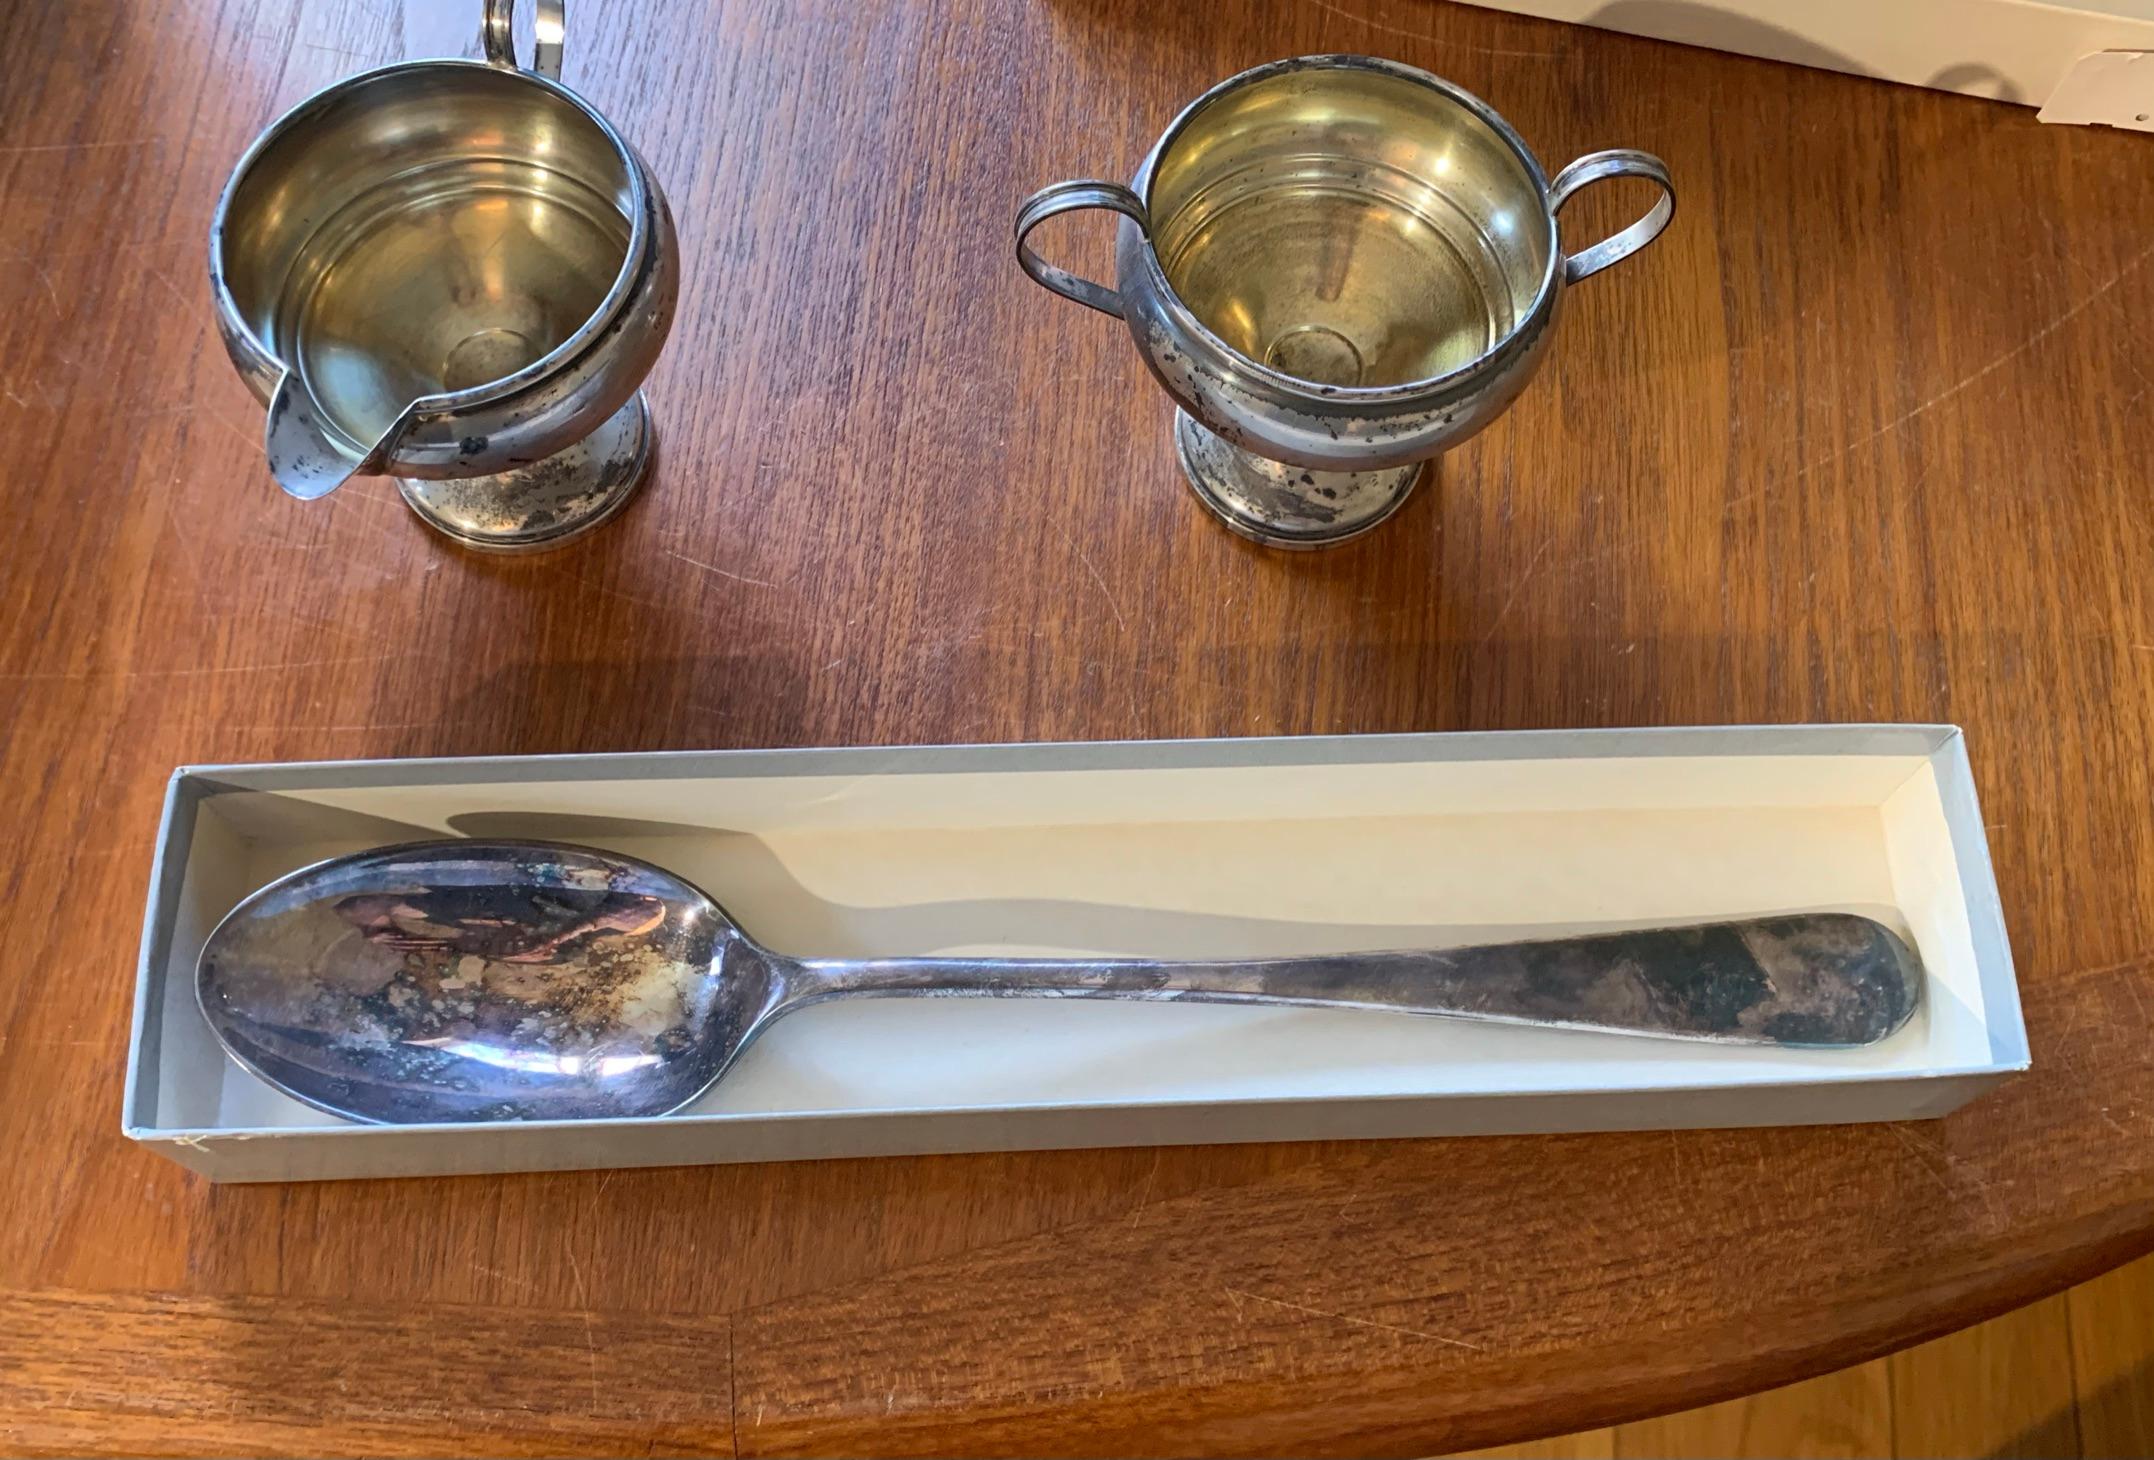 2 Pieces of Weighted Sterling Silver Cream & Sugar & Rogers Silverplate Serving Spoon in Box